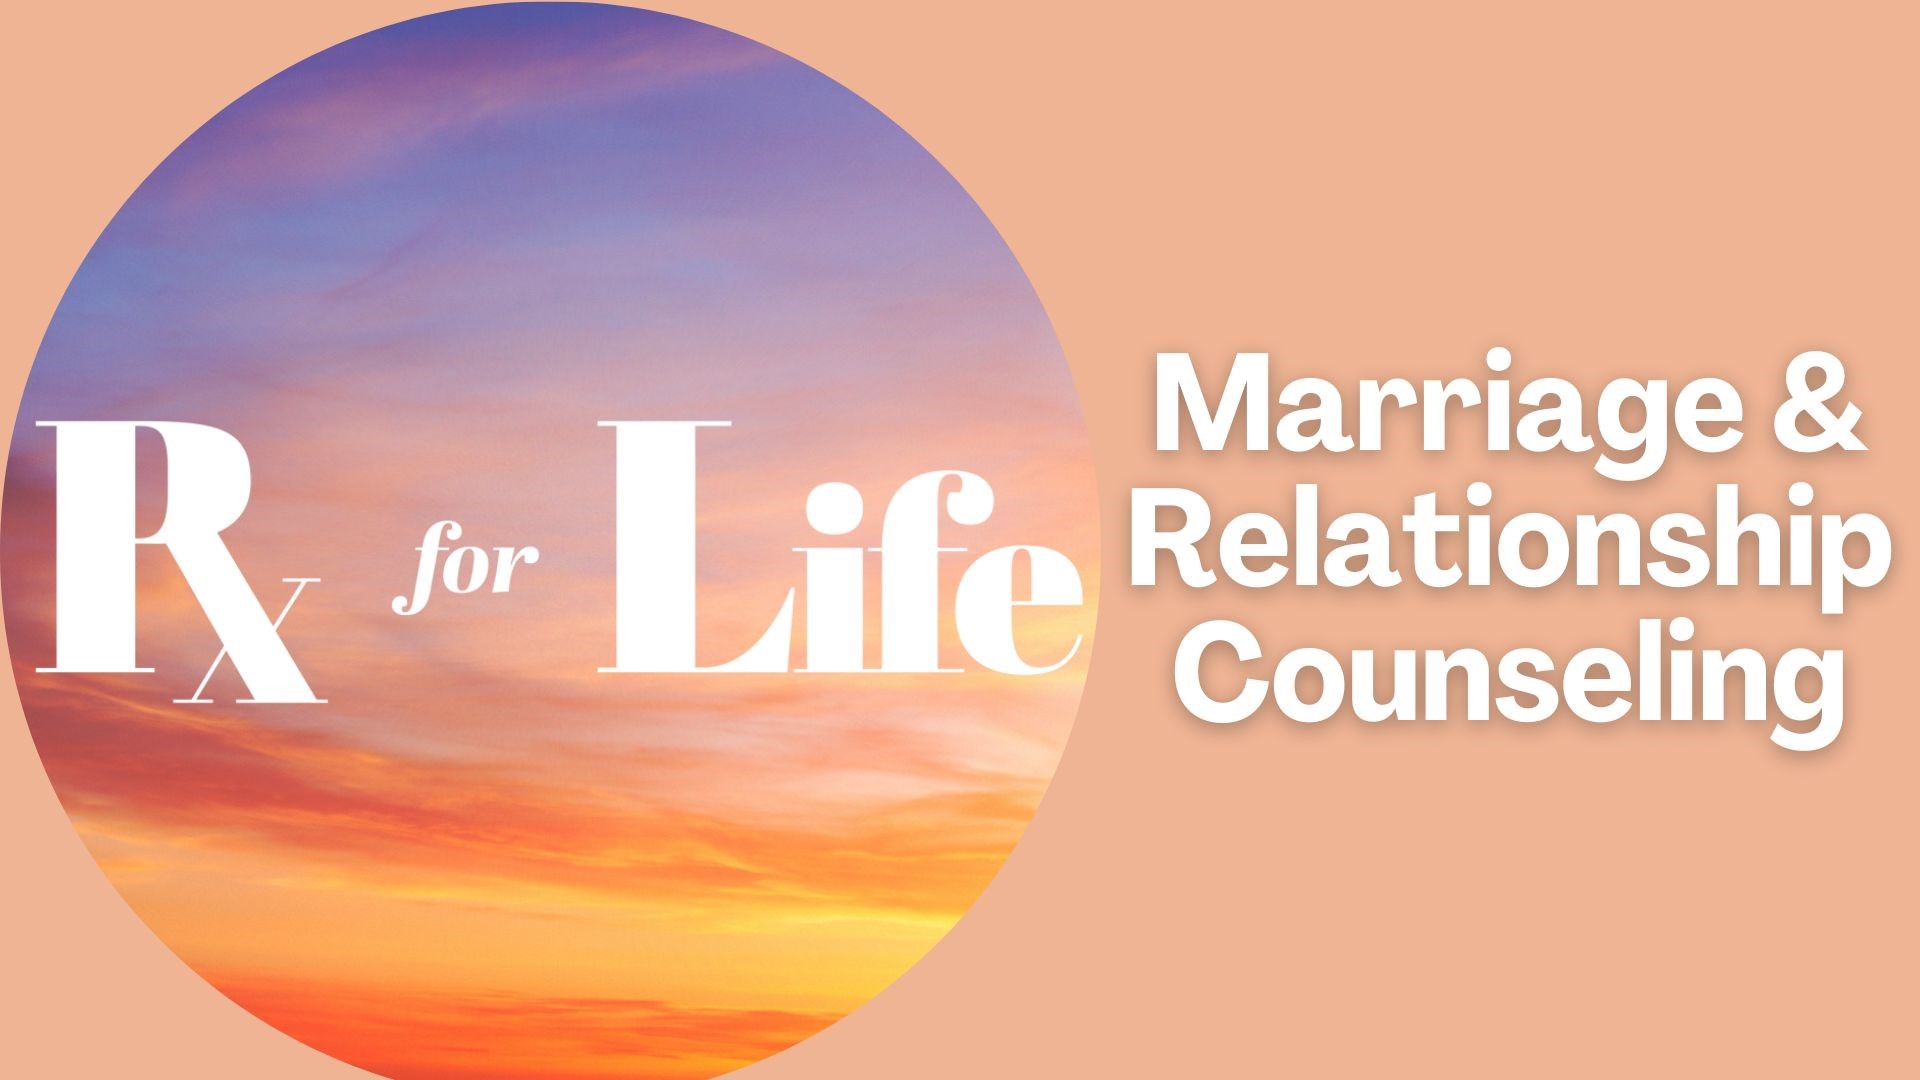 Monica Robins sits down with a relationship expert to discuss the five signs you need marriage counseling and other things to know to make relationships work.